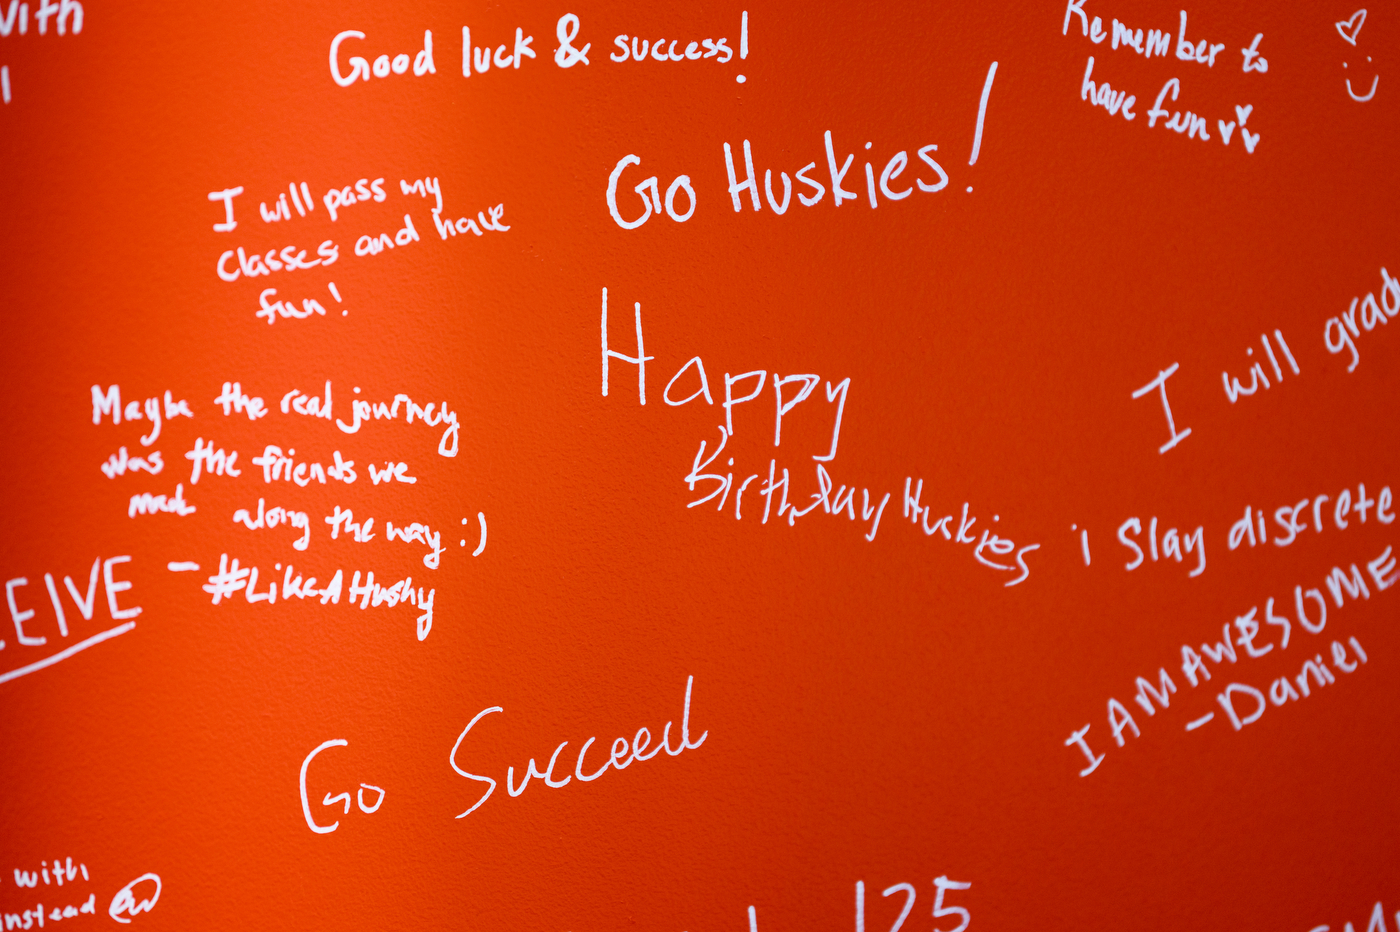 Messages written in white ink on a red background of the mural: Happy Birthday huskies, I am awesome, Go Succeed, Good luck and success!, Remember to have fun, Go Huskies!